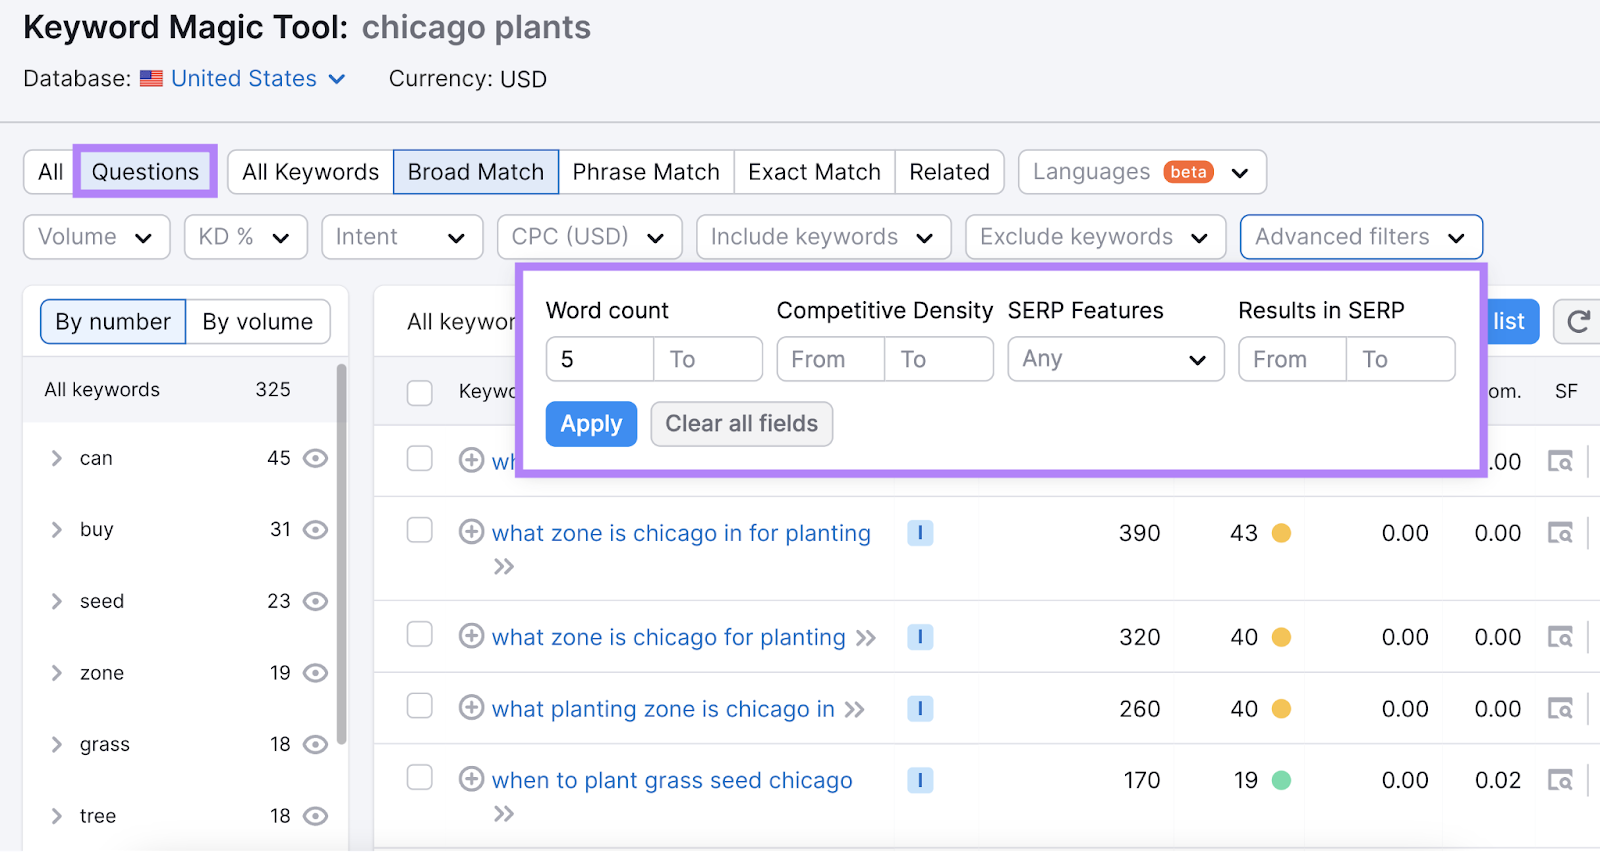 advanced filter successful  keyword magic instrumentality   with minimum connection     number  acceptable   to 5